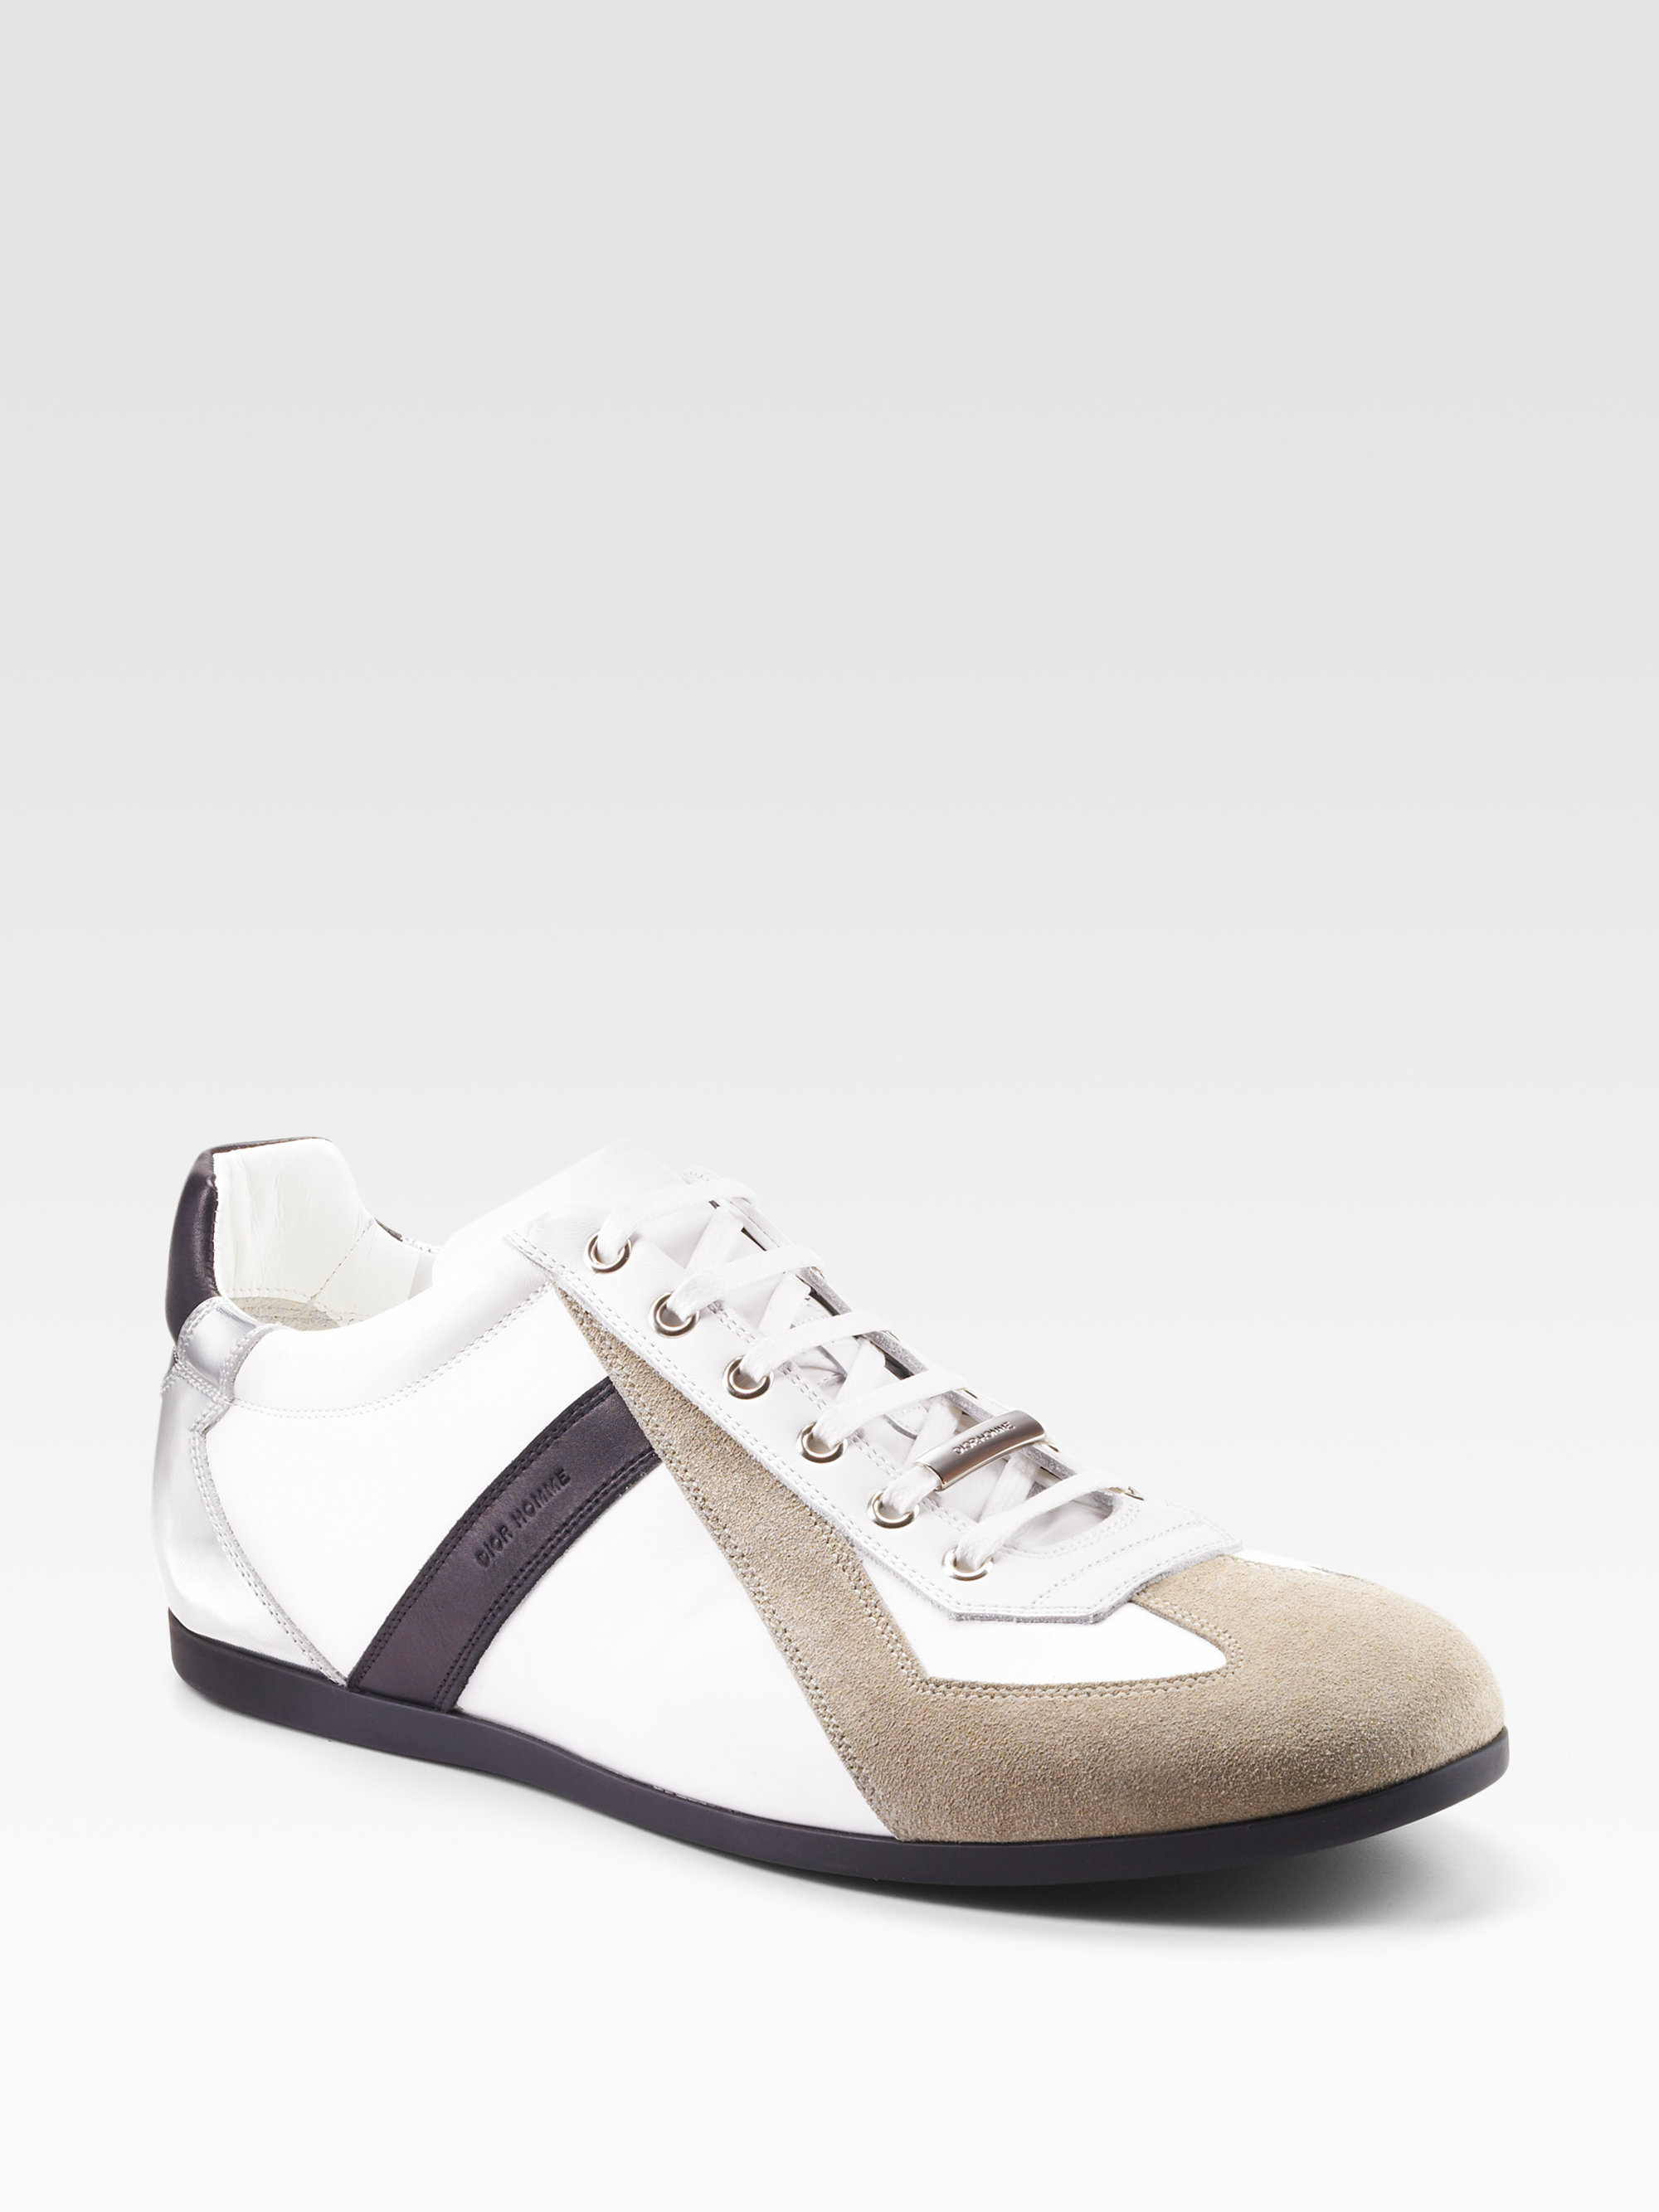 Dior Homme Detailed Leather Sneakers in Black for Men (white-black) | Lyst